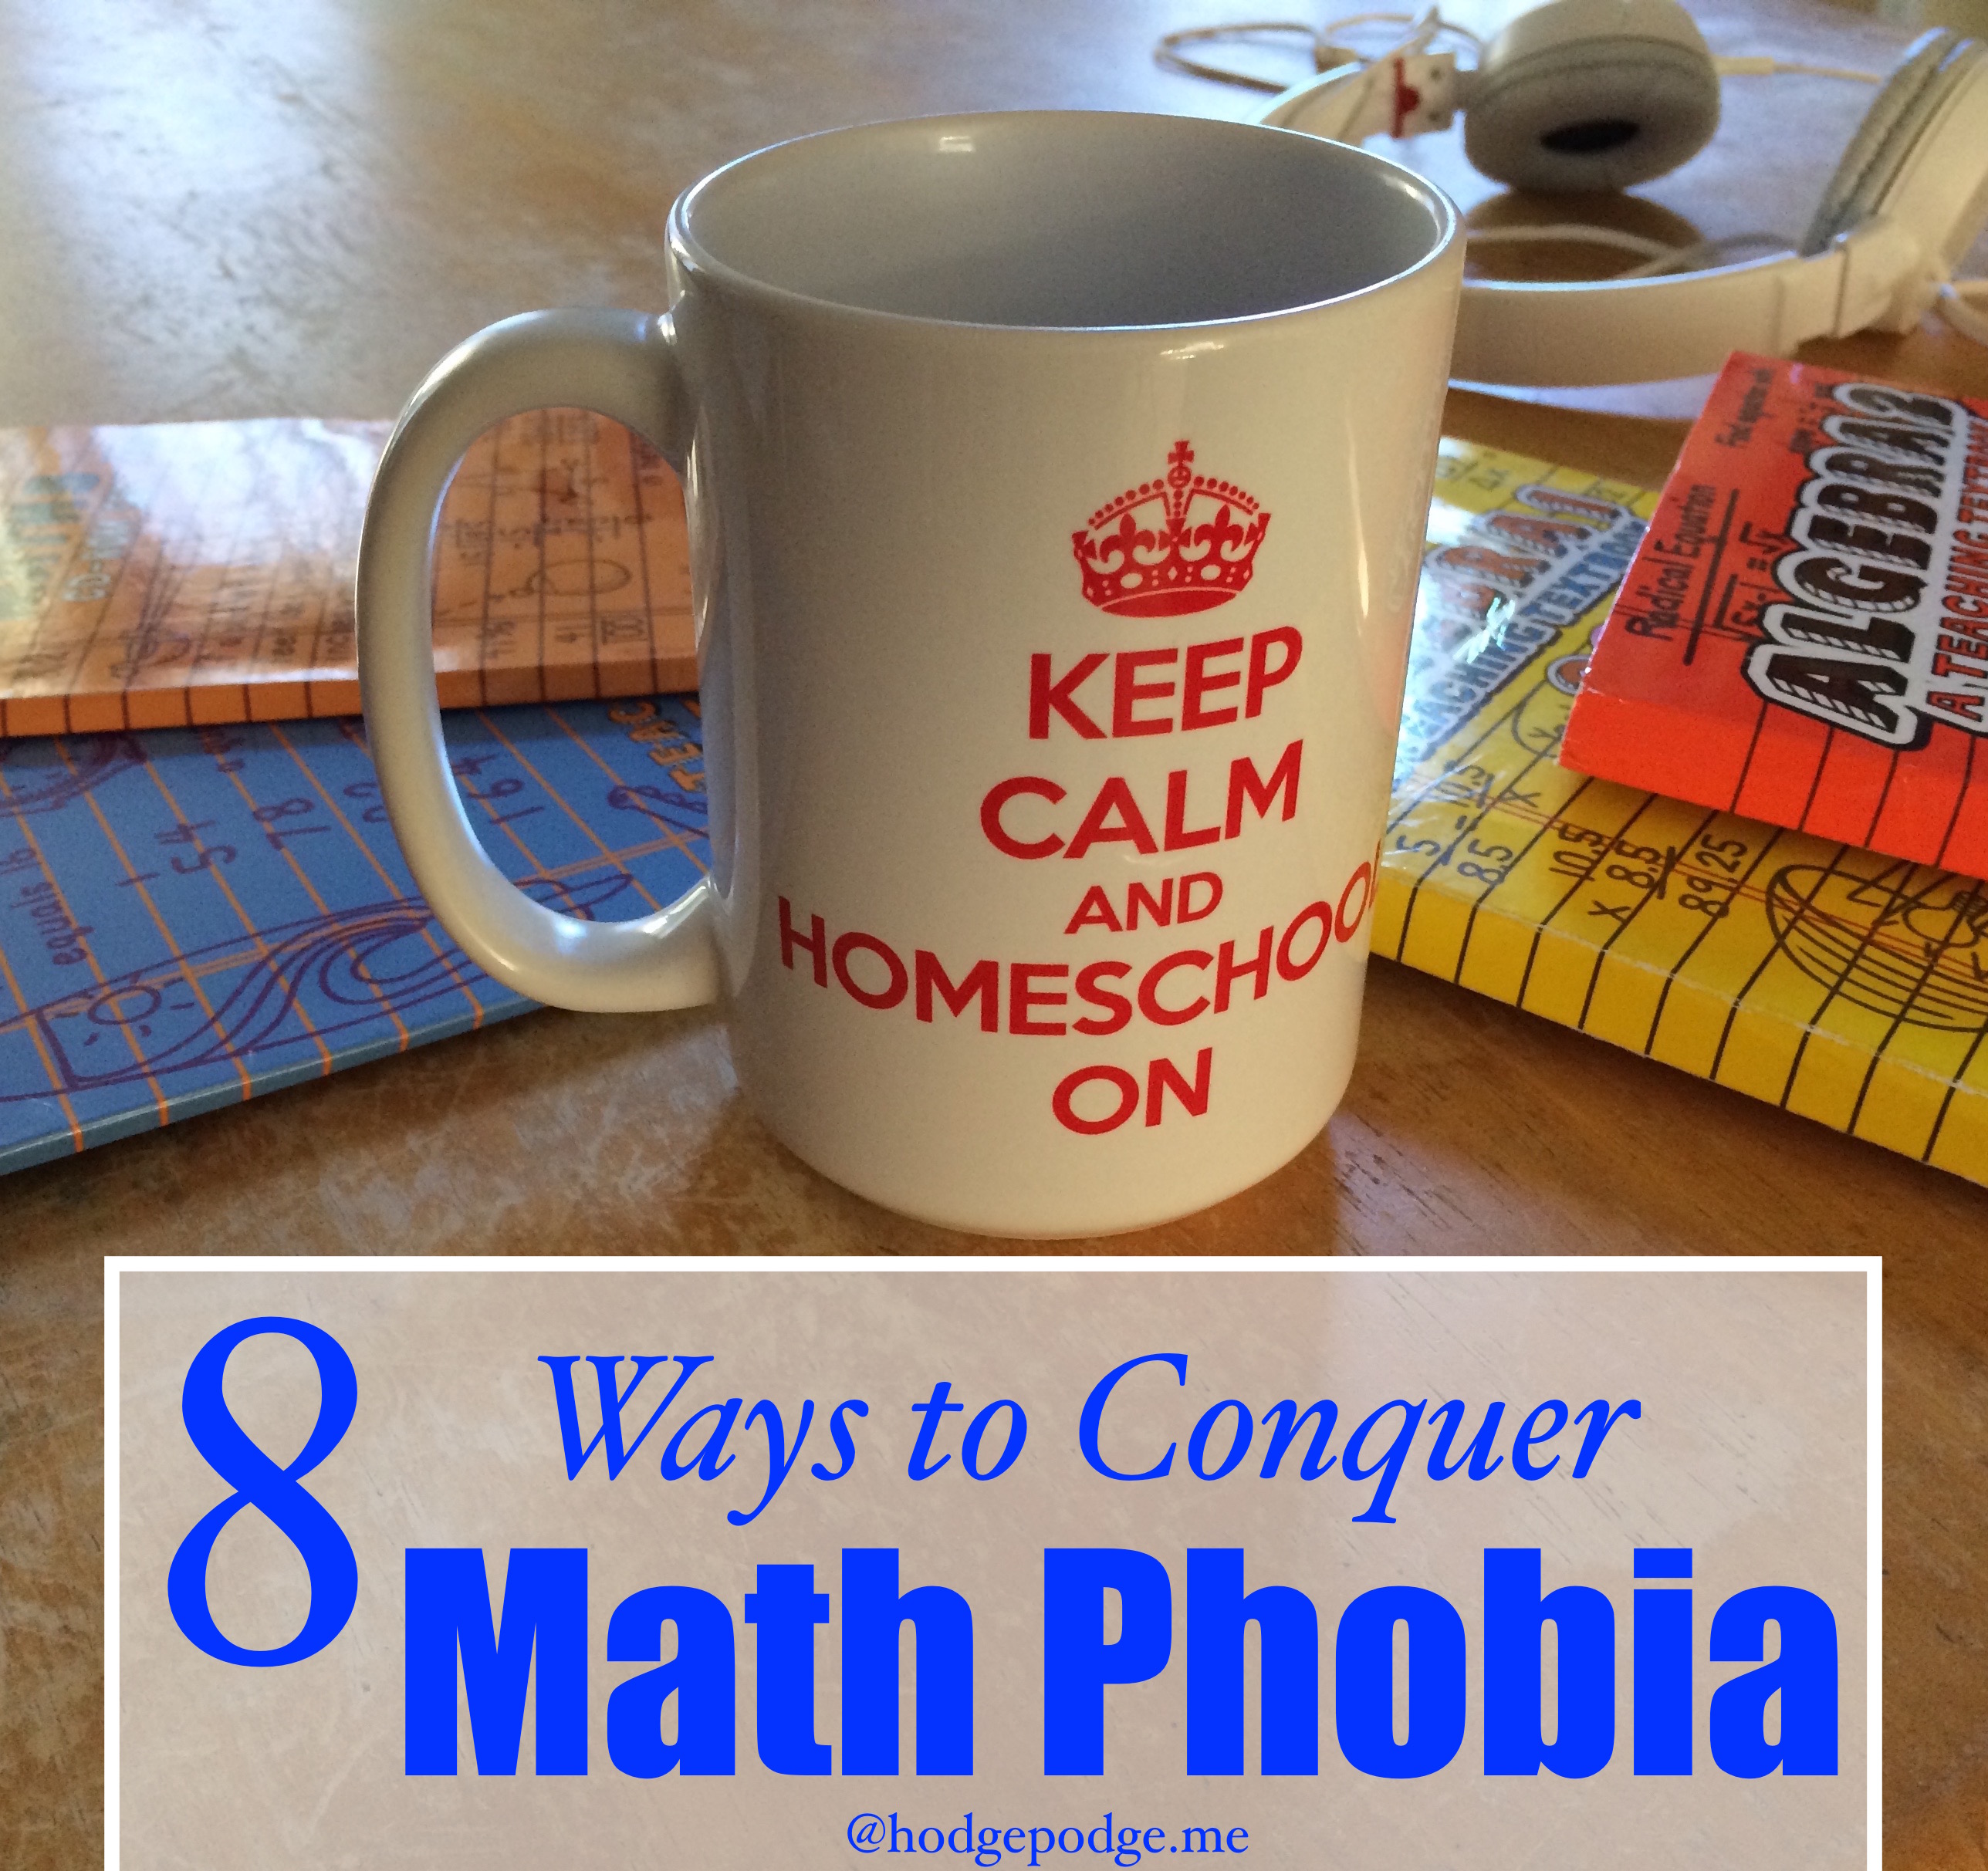 8 Ways to Conquer Math Phobia